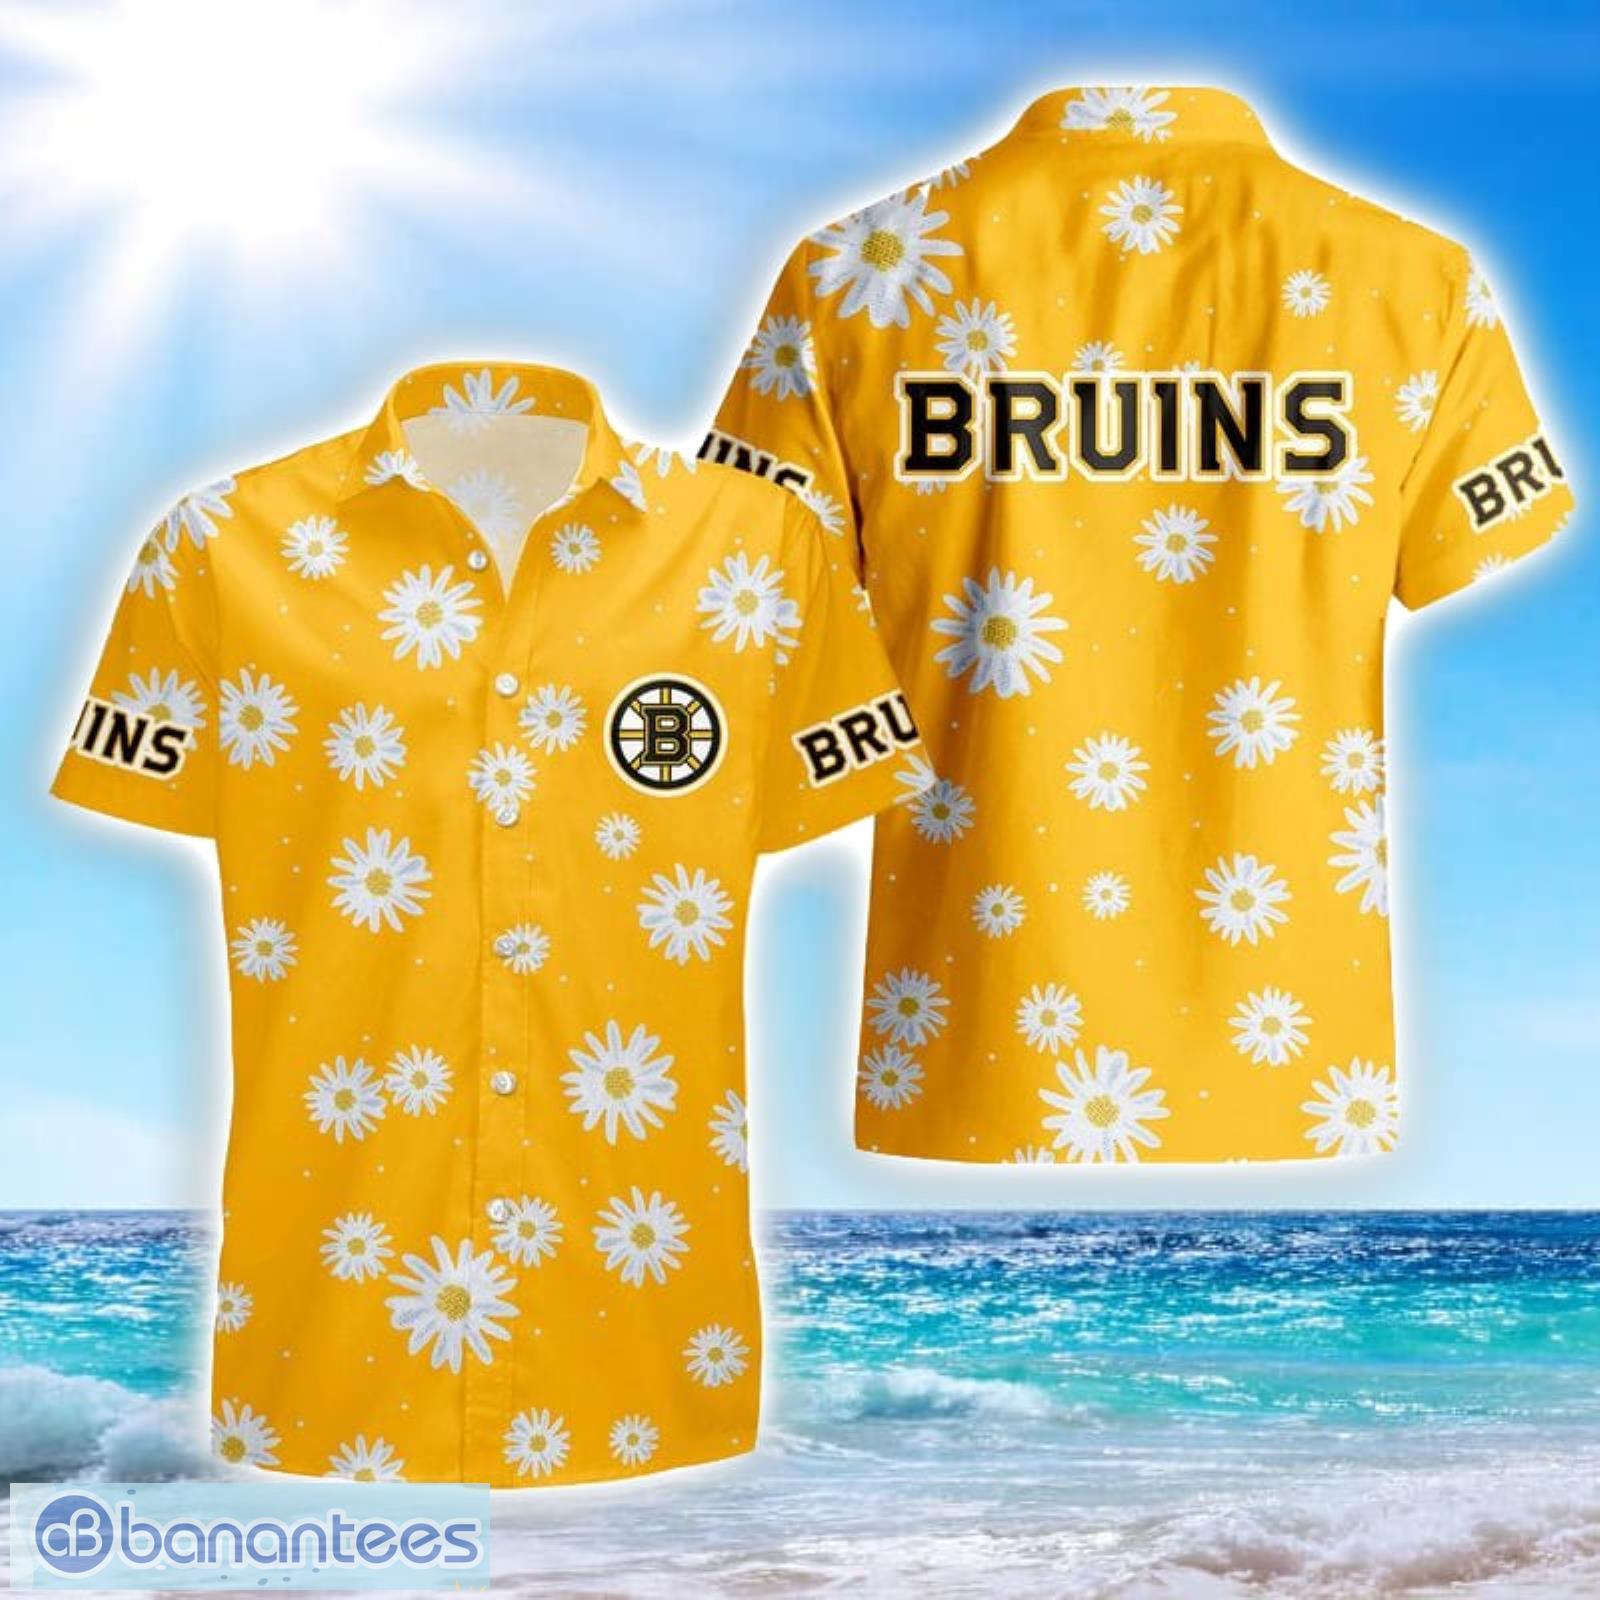 Boston Bruins Hawaiian Shirts red sox - Ingenious Gifts Your Whole